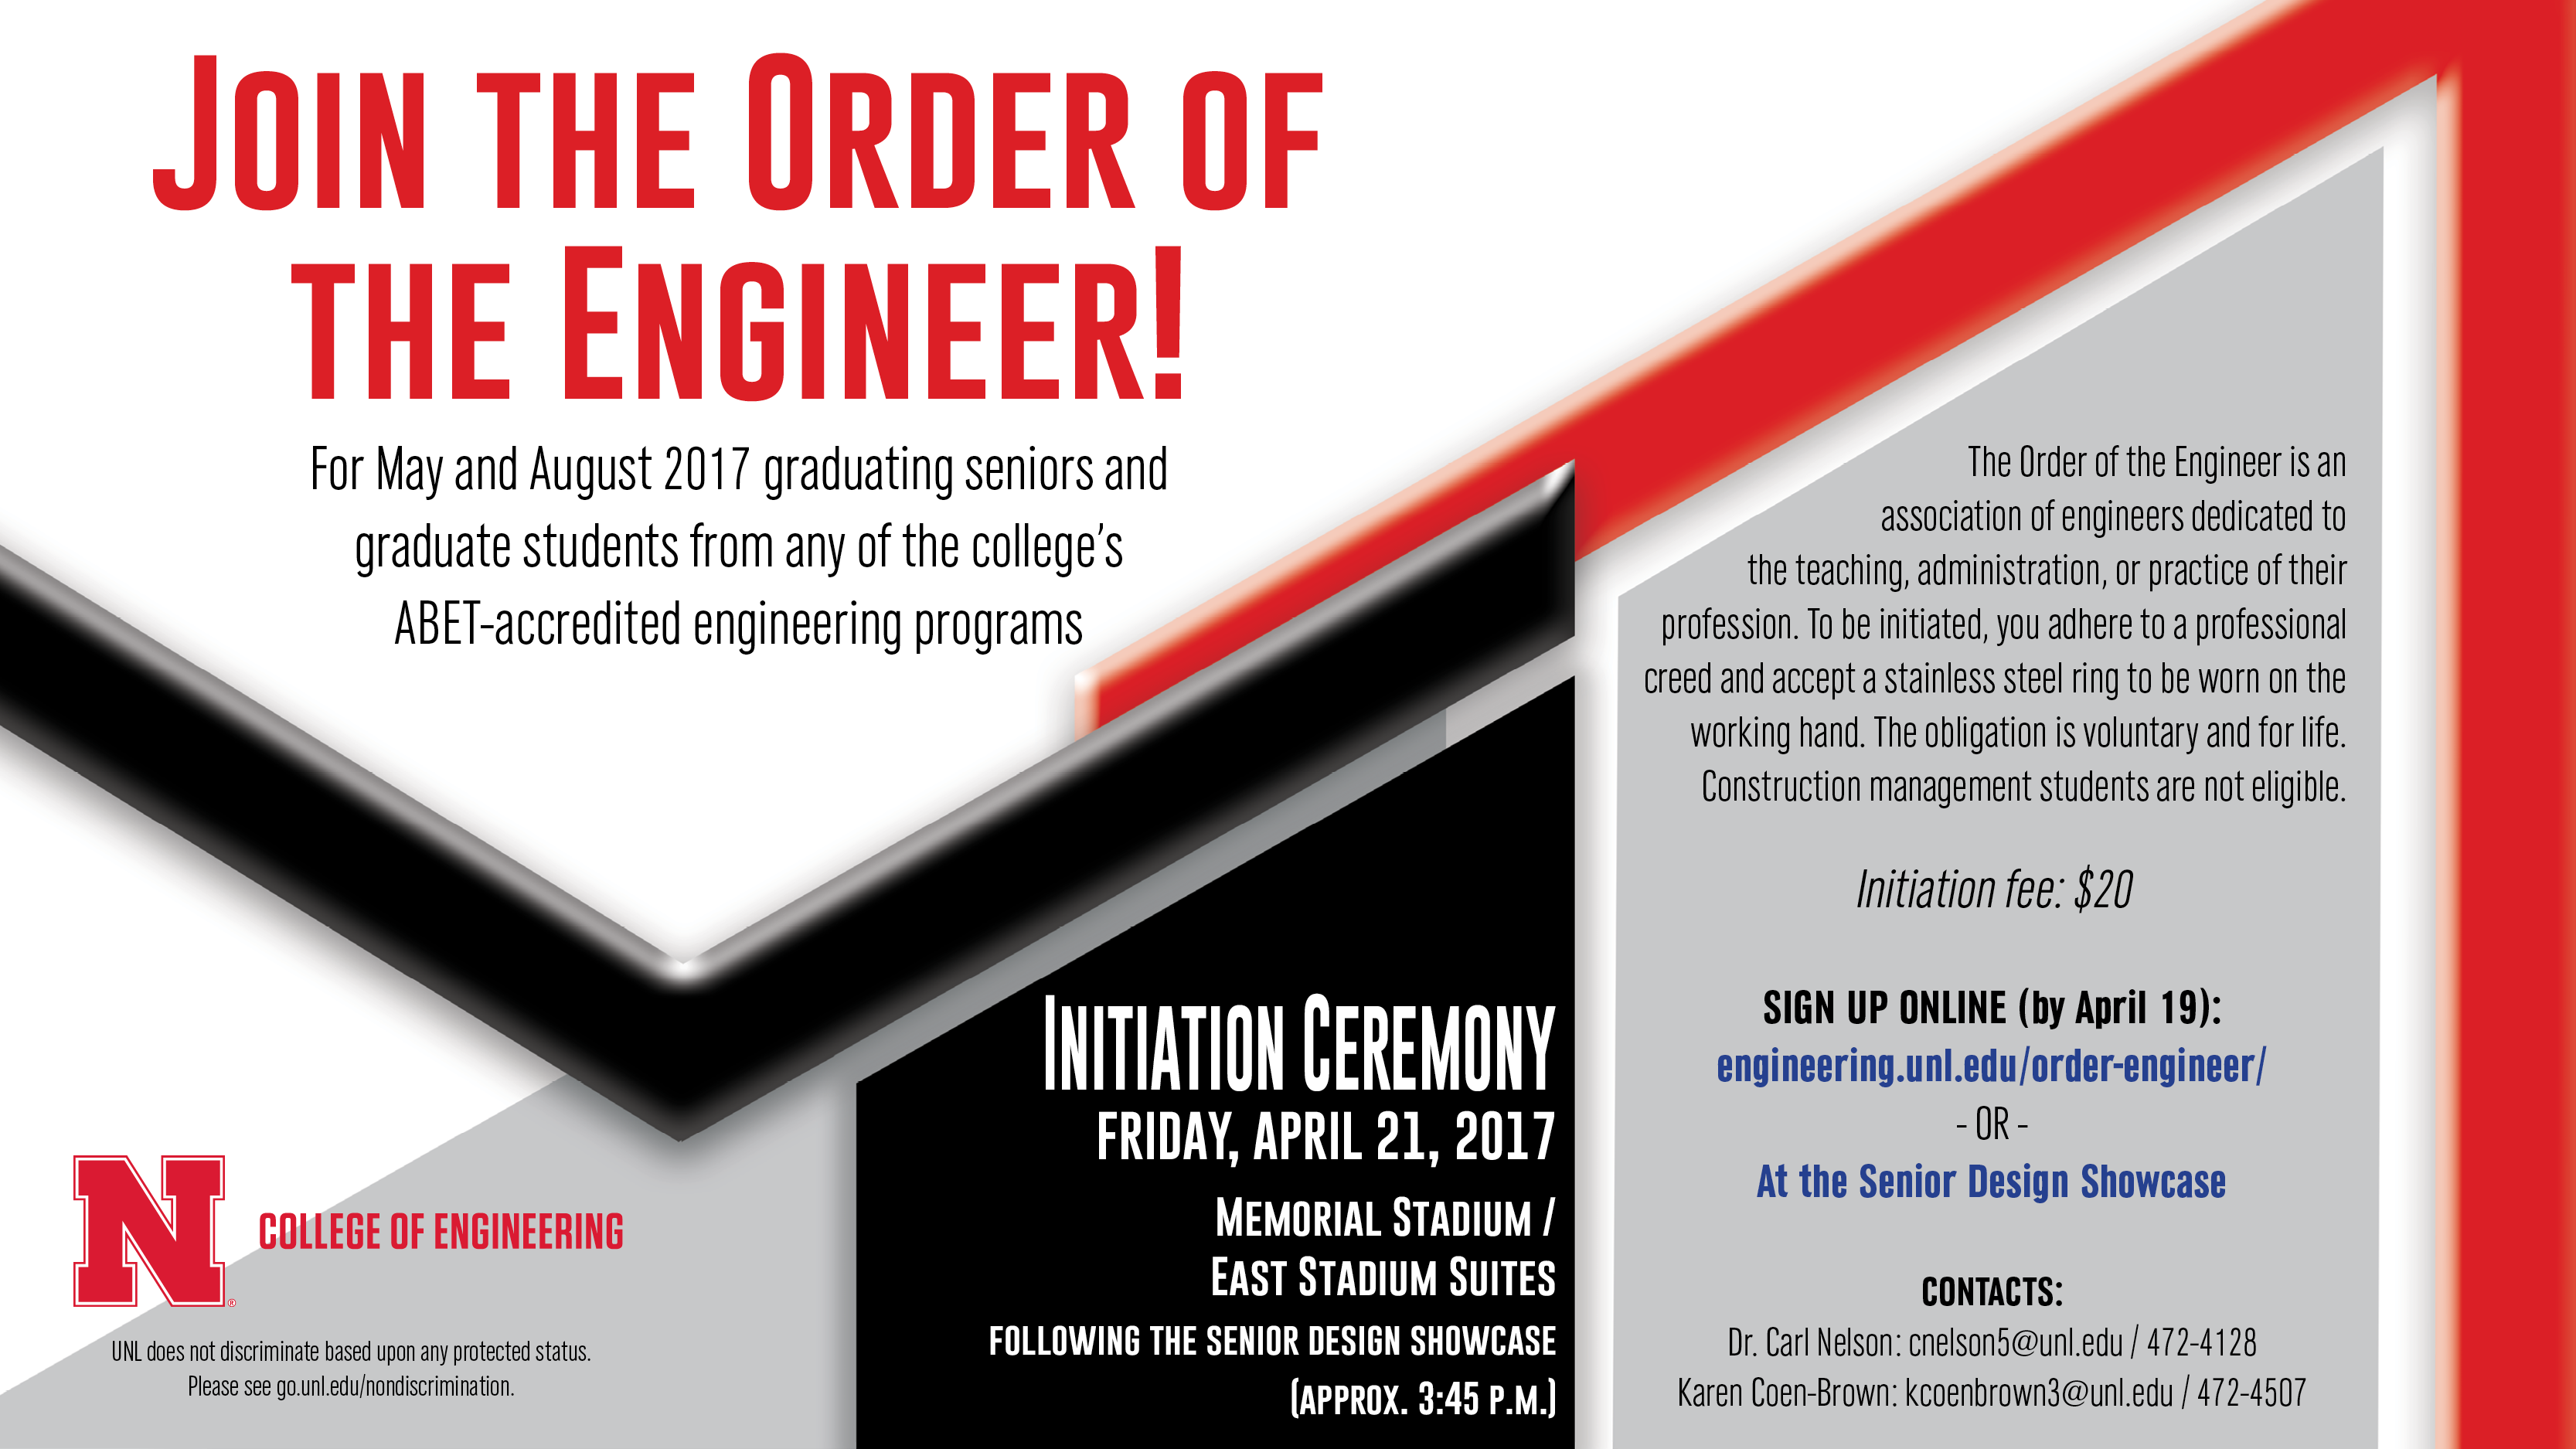 Order of the Engineer initiation ceremony in Lincoln is April 21.